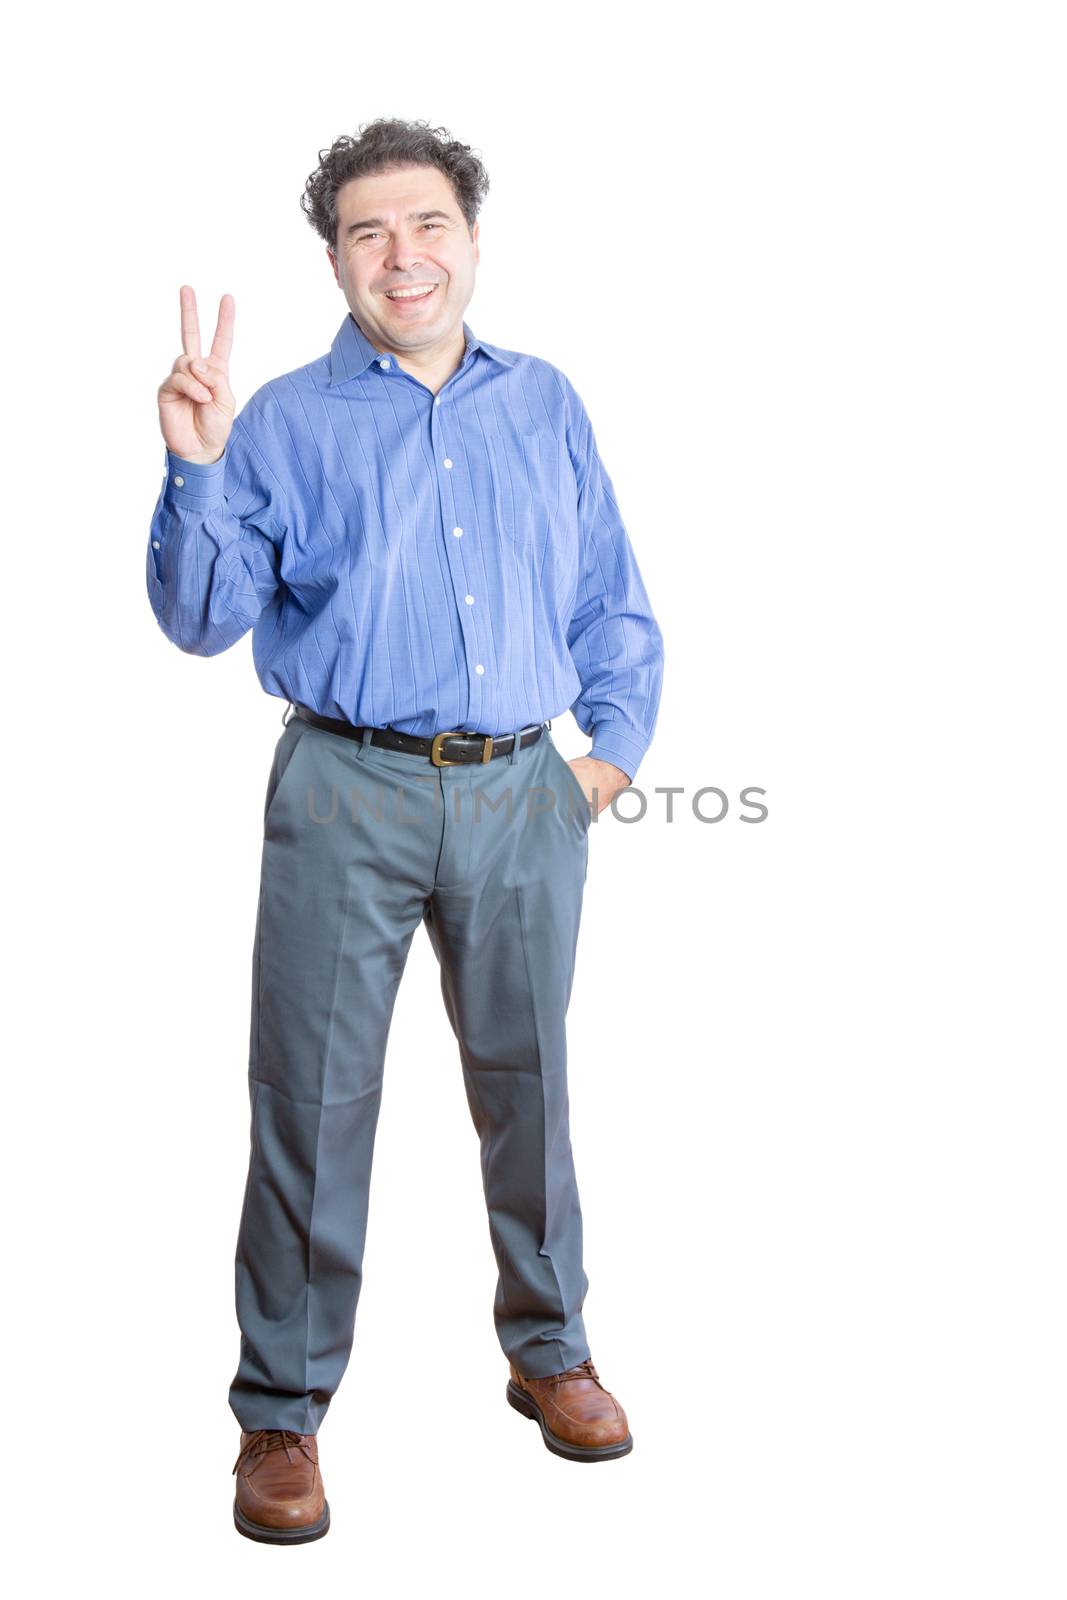 Full Length Shot of a Happy Businessman Showing a Peace Hand Sign at the Camera. Isolated on a White Background.